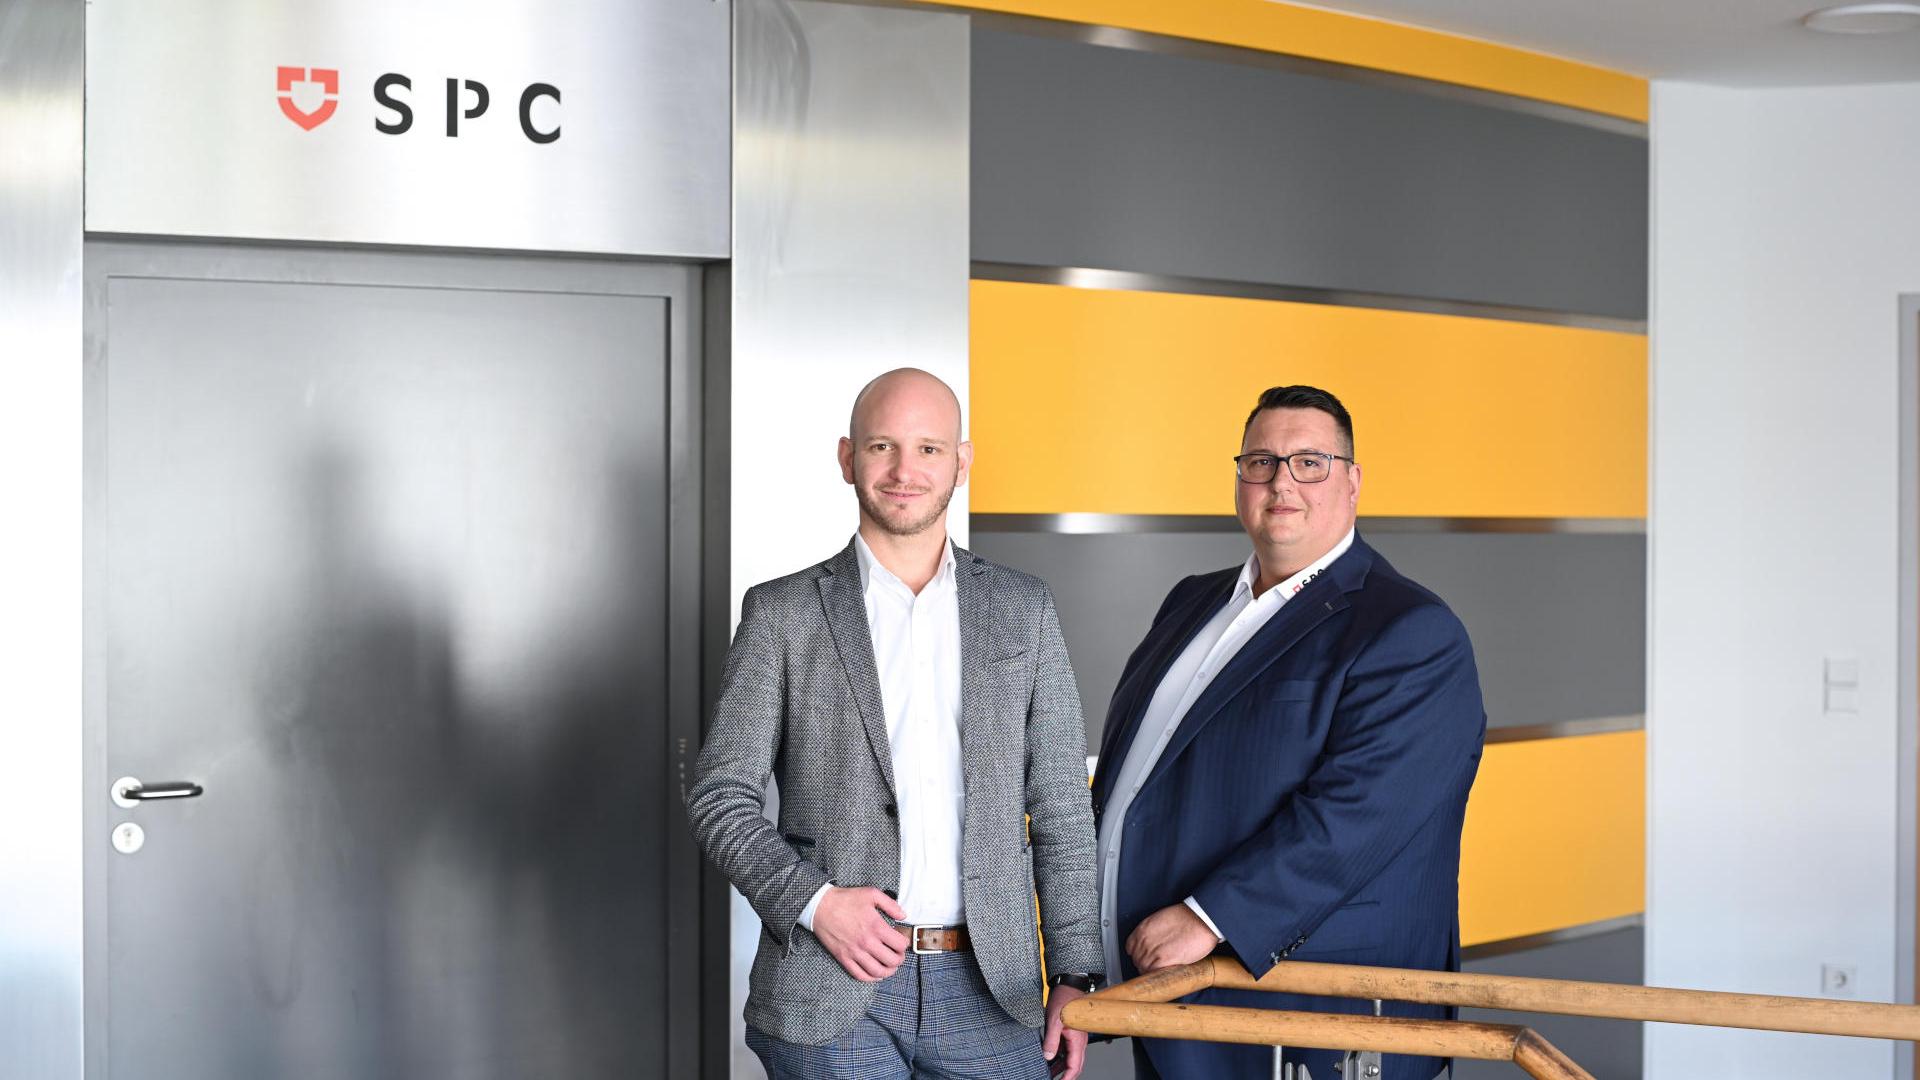 Alexander Maier, Managing Director and Thomas Schaupp, Laboratory Manager at SPC.